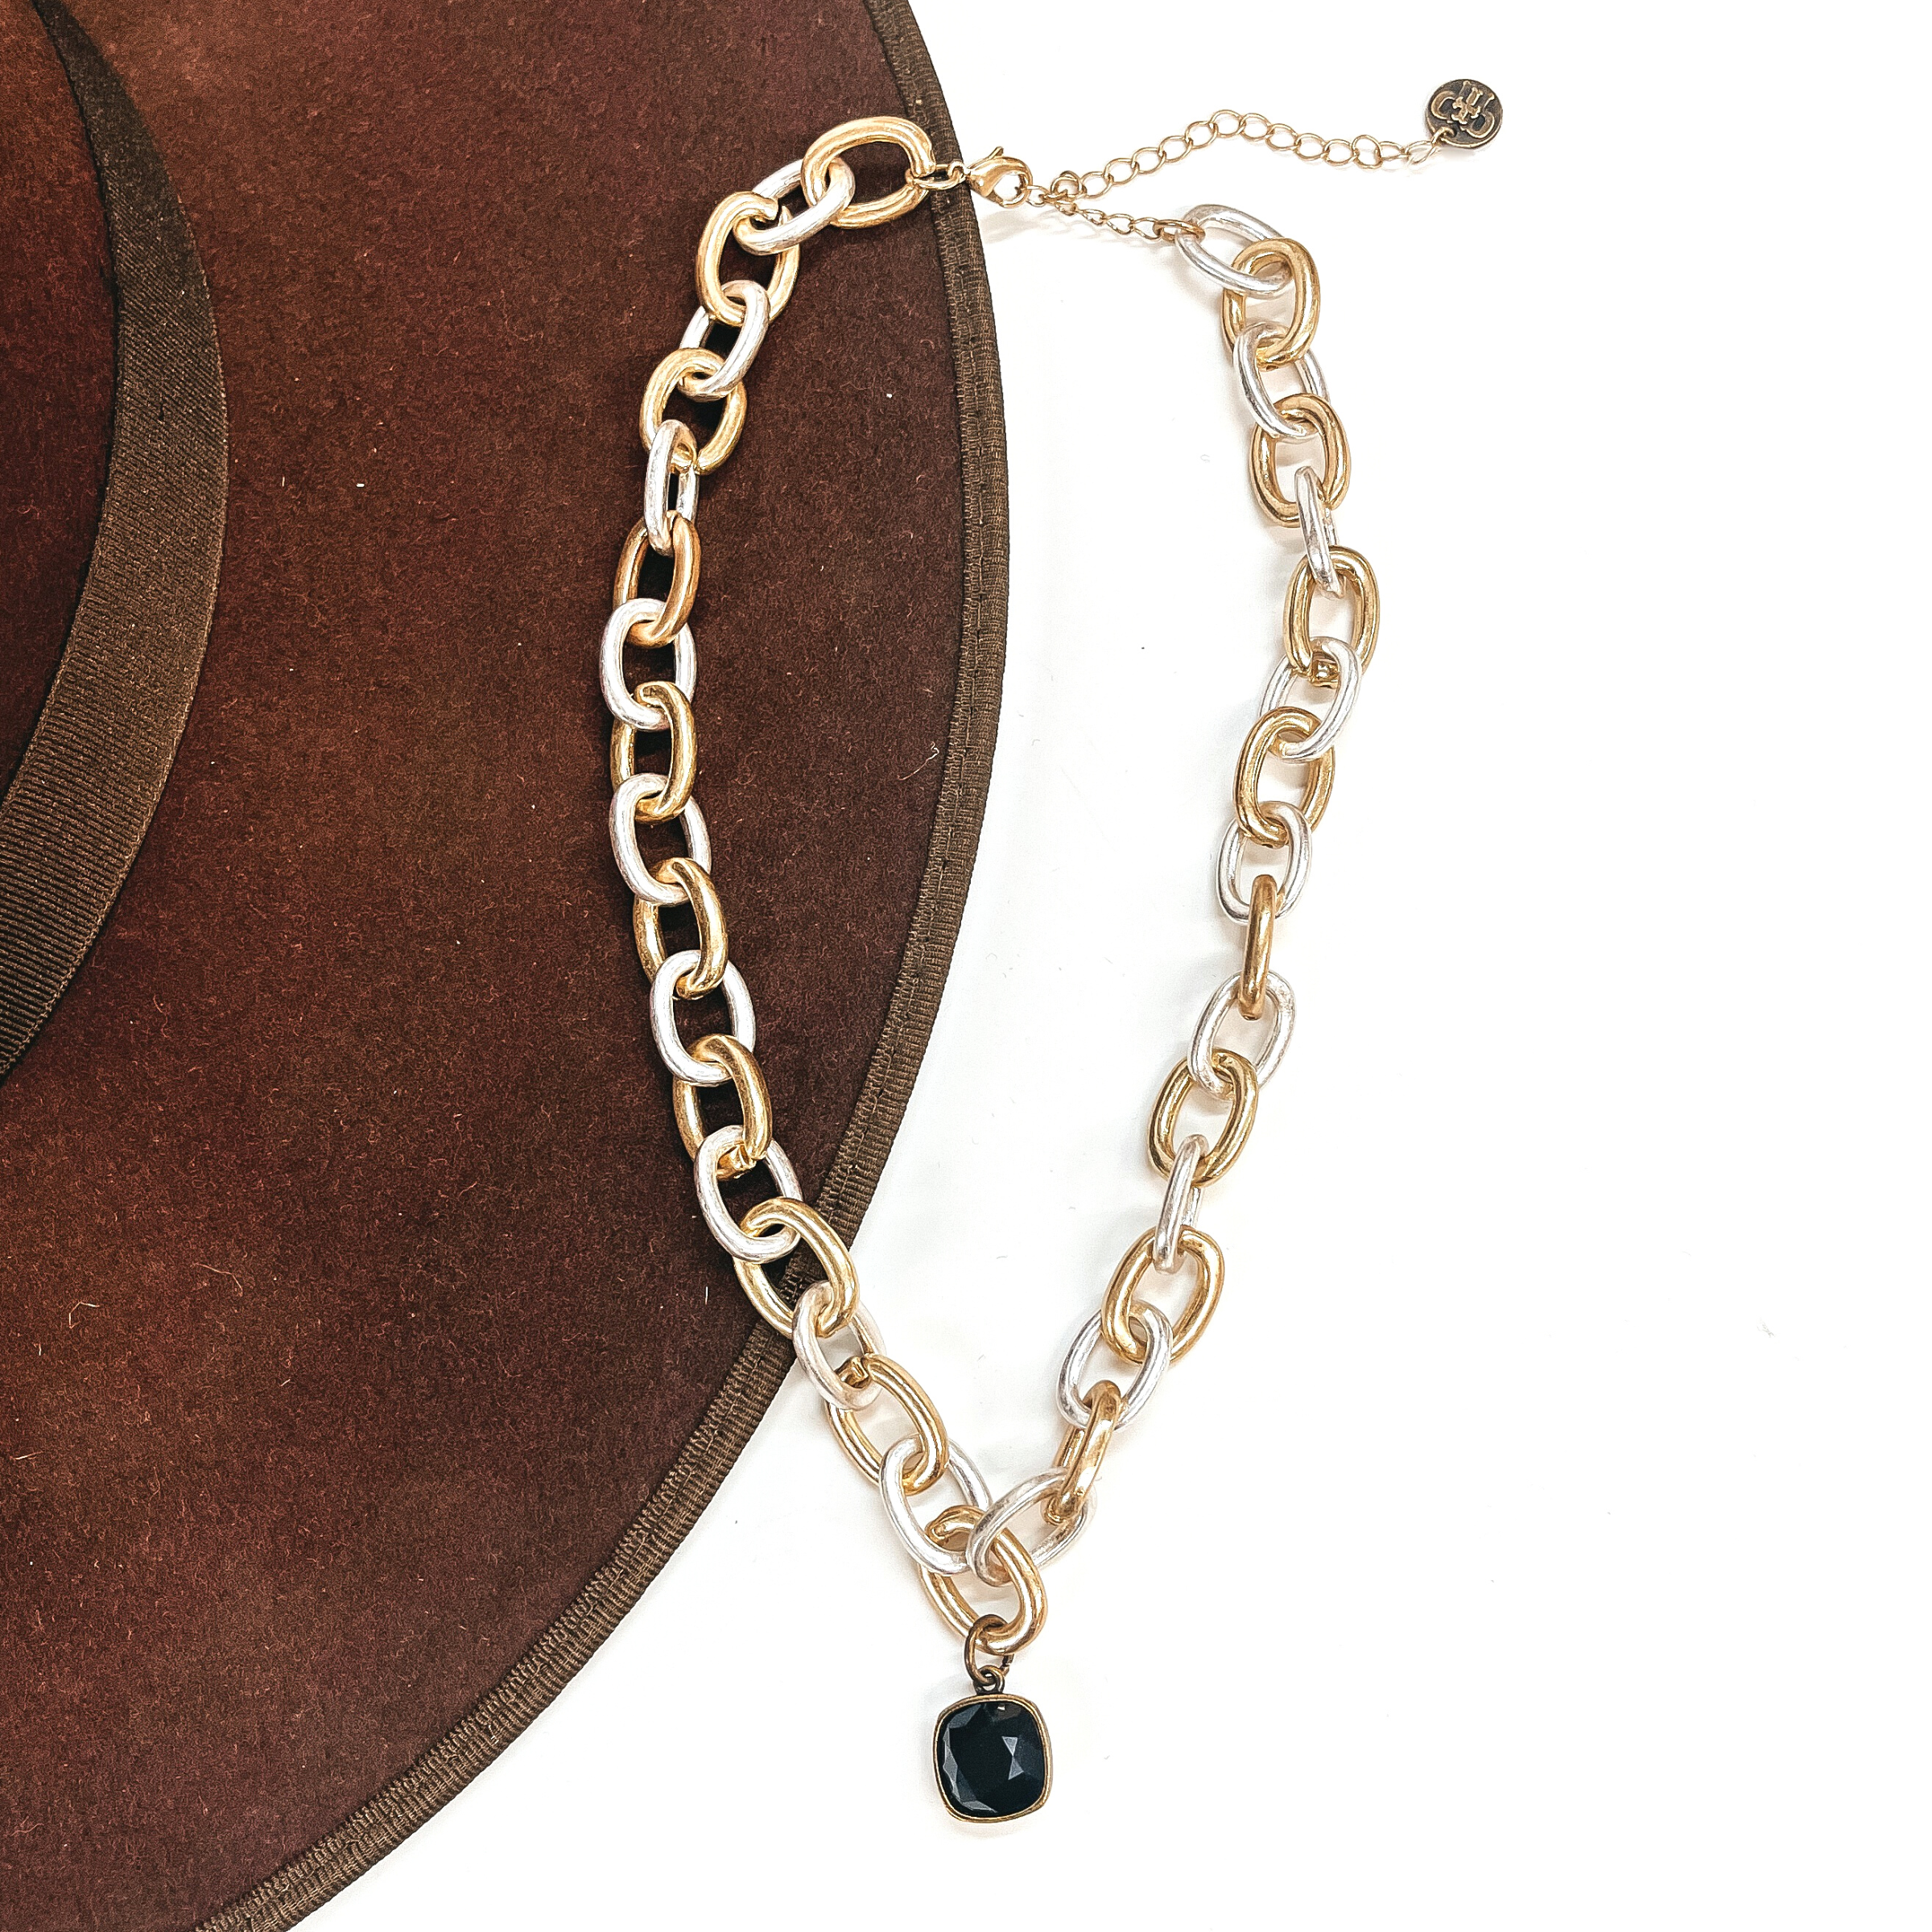 This is silver and gold tone thick linked chain necklace with a black cushion cut crystal  charm in a bronze setting. This necklace is taken laying on a dark brown hat brim  and on a white background.